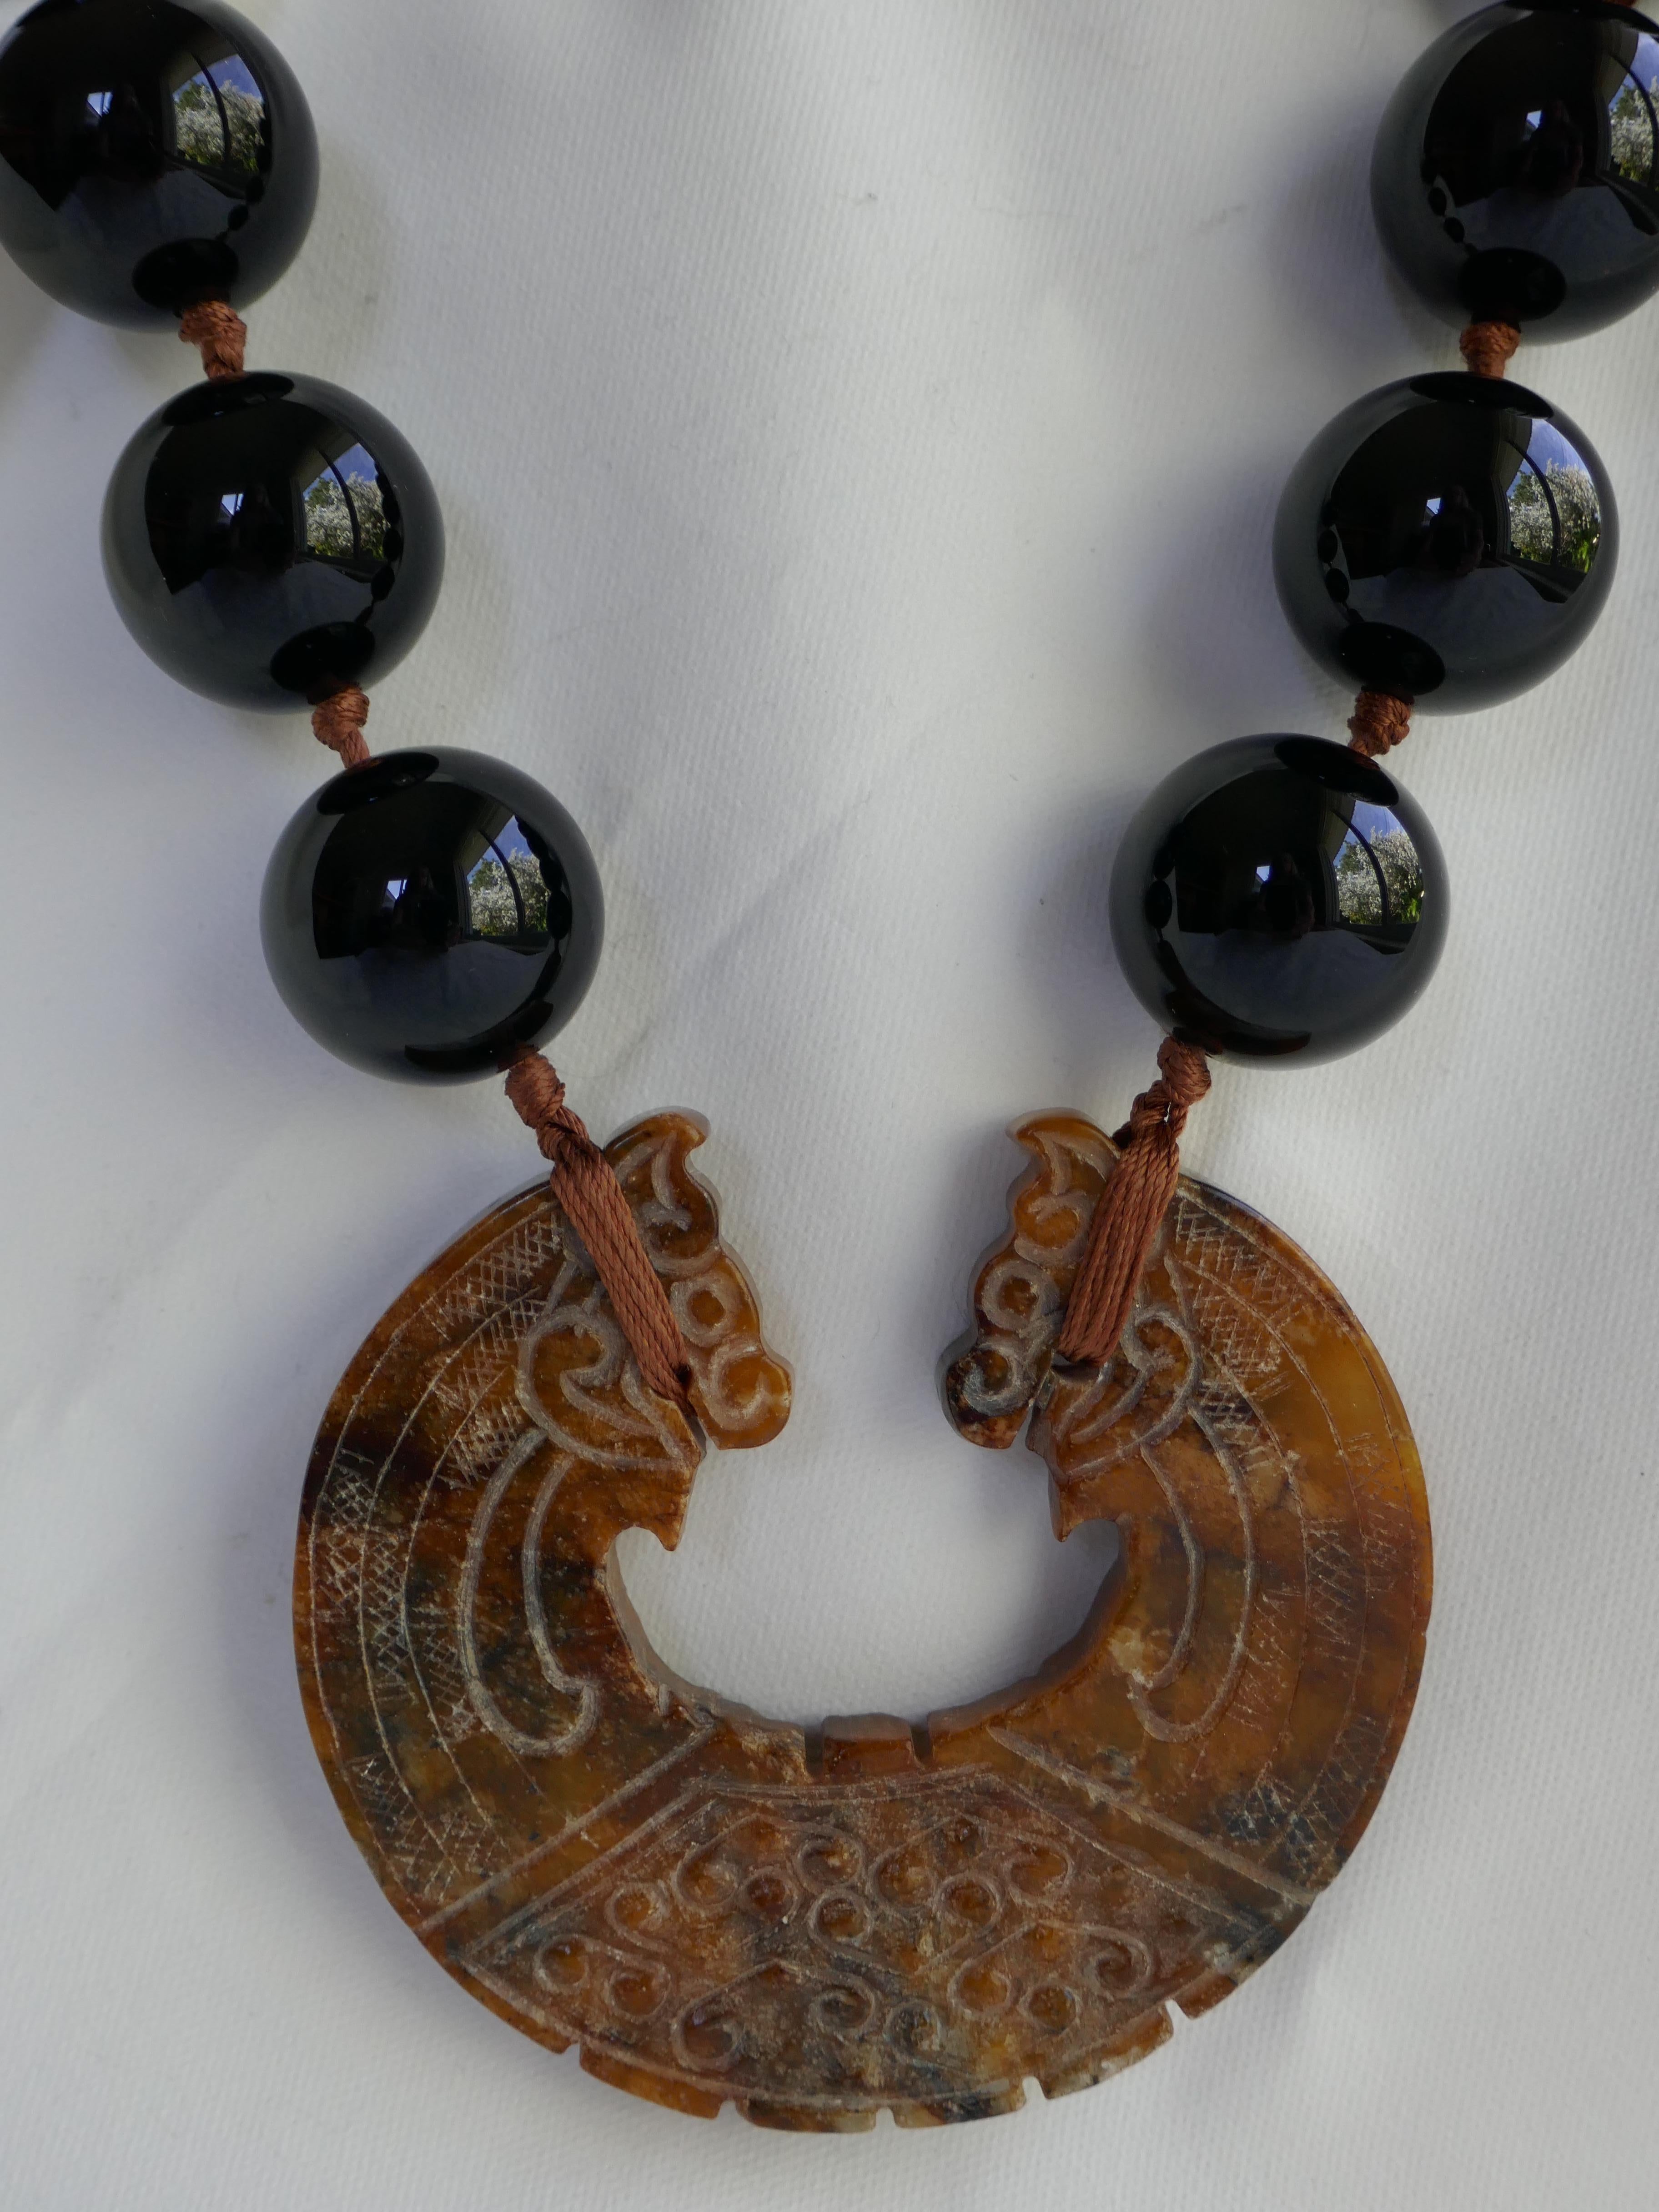 Onyx goes with everything. The onyx beads in this necklace are 22mm and looks amazing on. 22mm are not that readily available but I love the sheer statement on large round  beads. The jasper pendant is carved and the contrast with the black onyx is